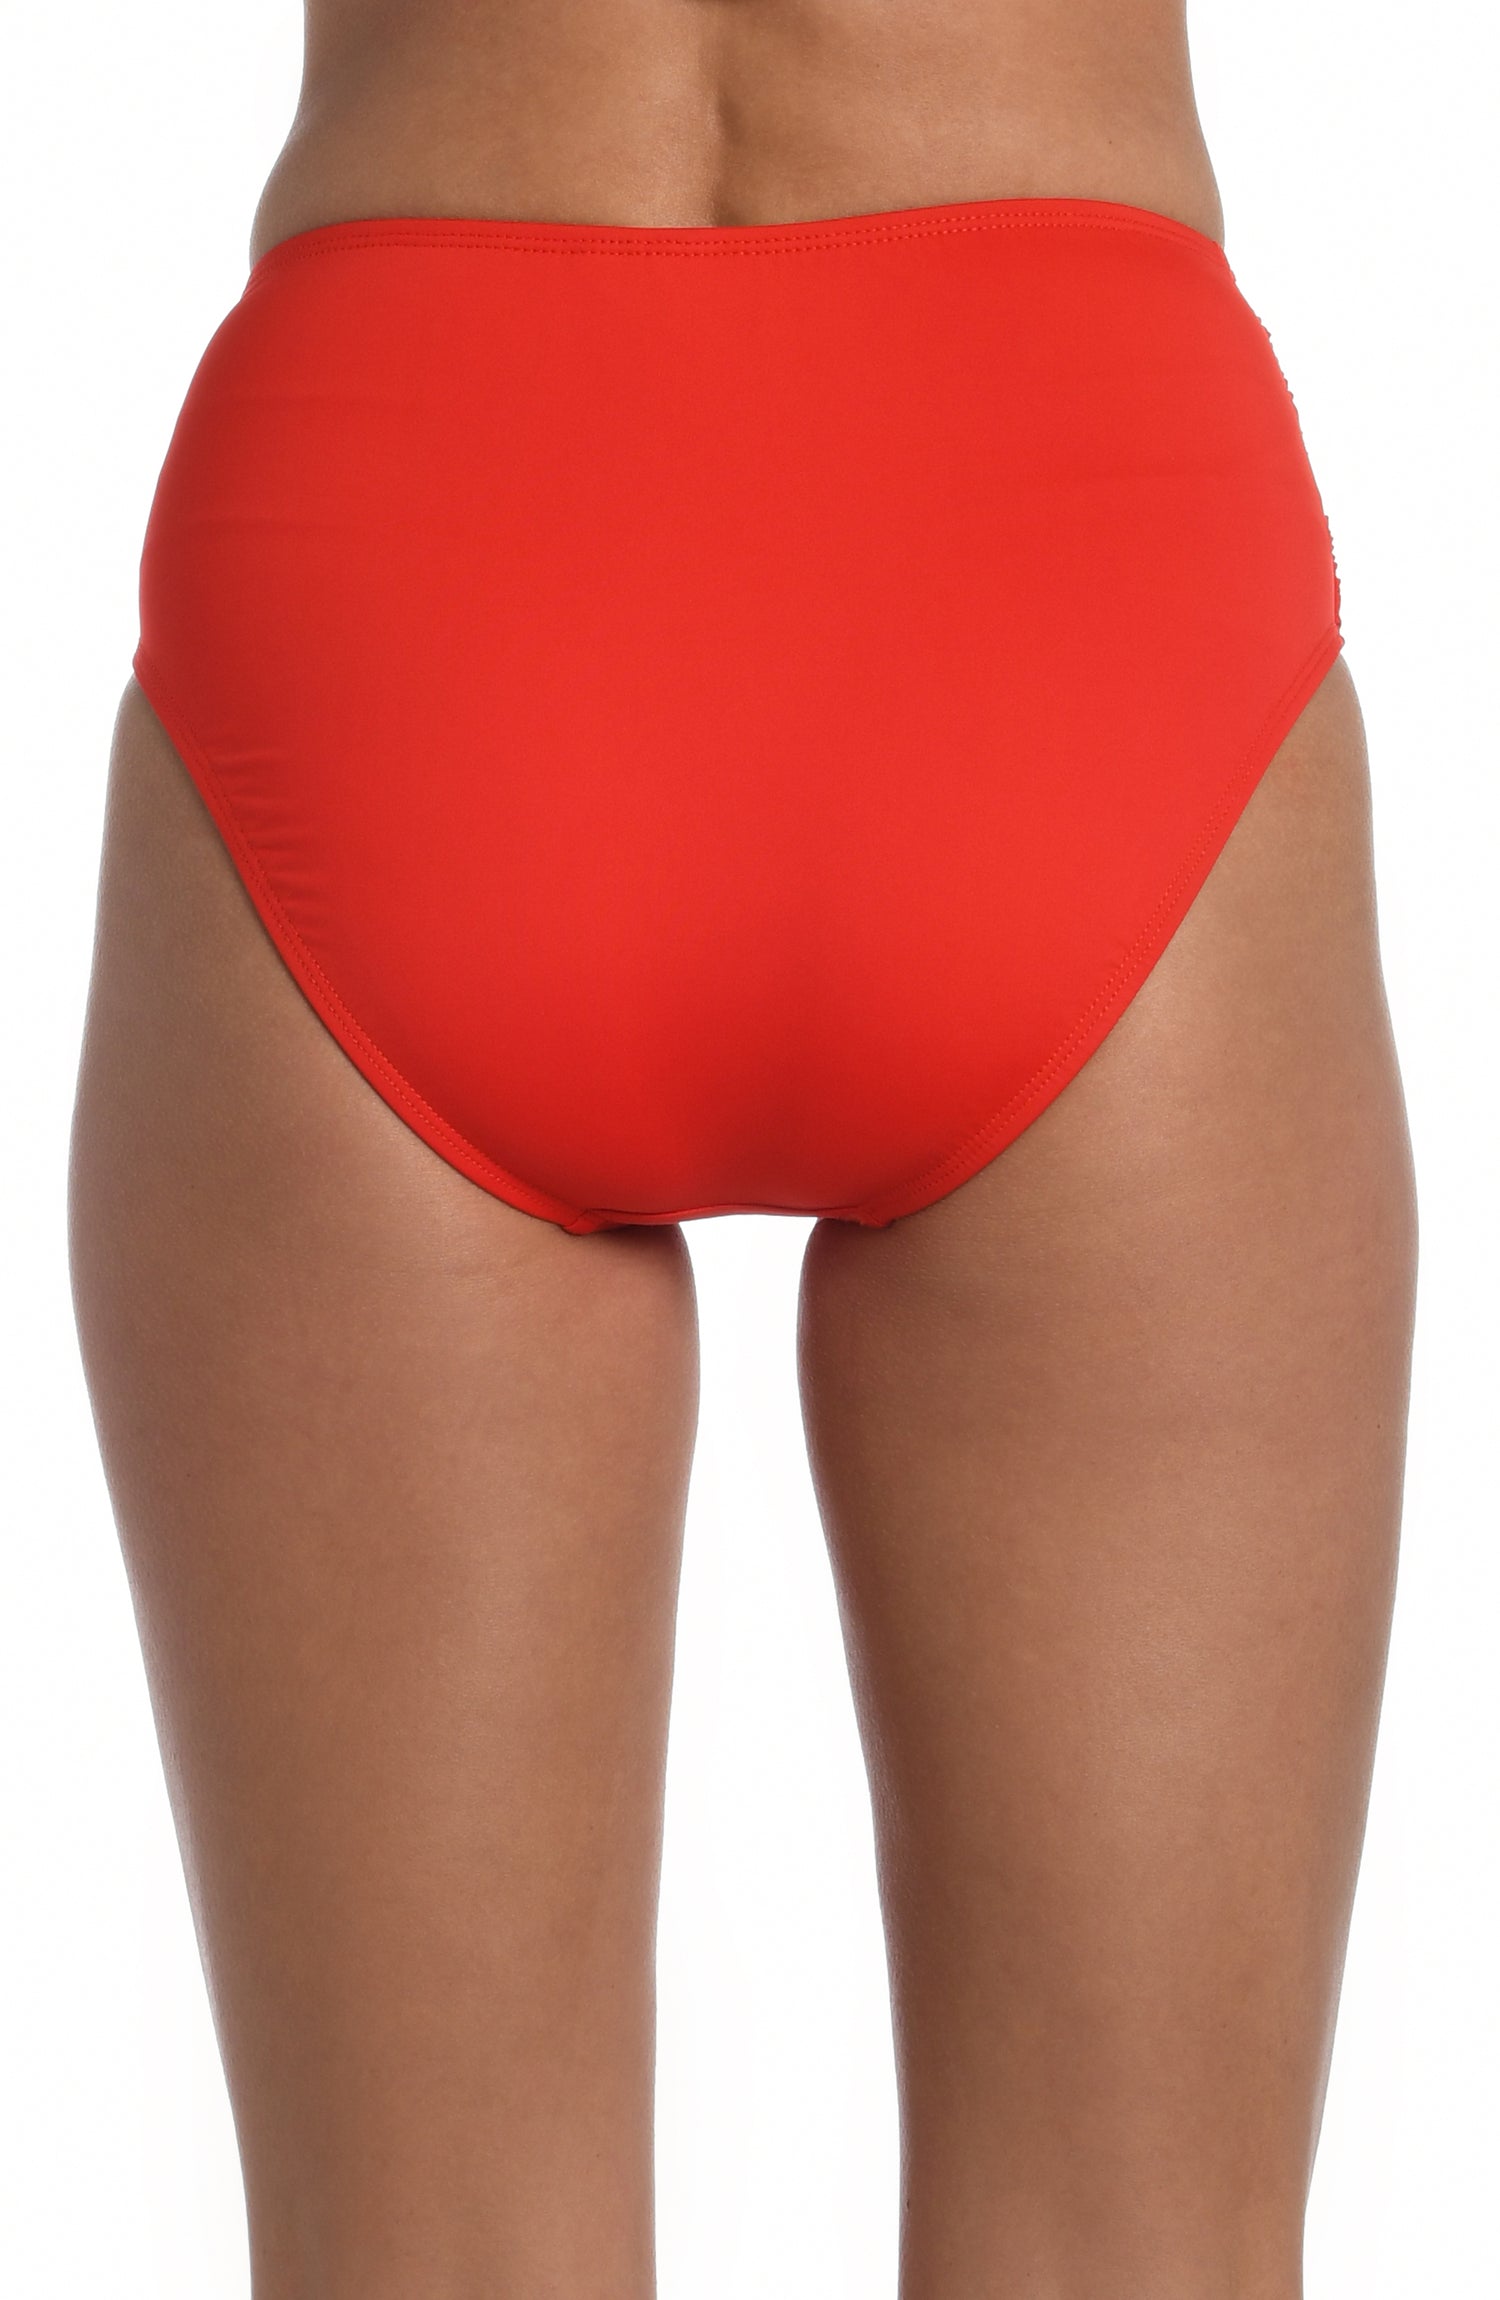 Model is wearing a cherry colored high waist swimsuit bottom from our Best-Selling Island Goddess collection.